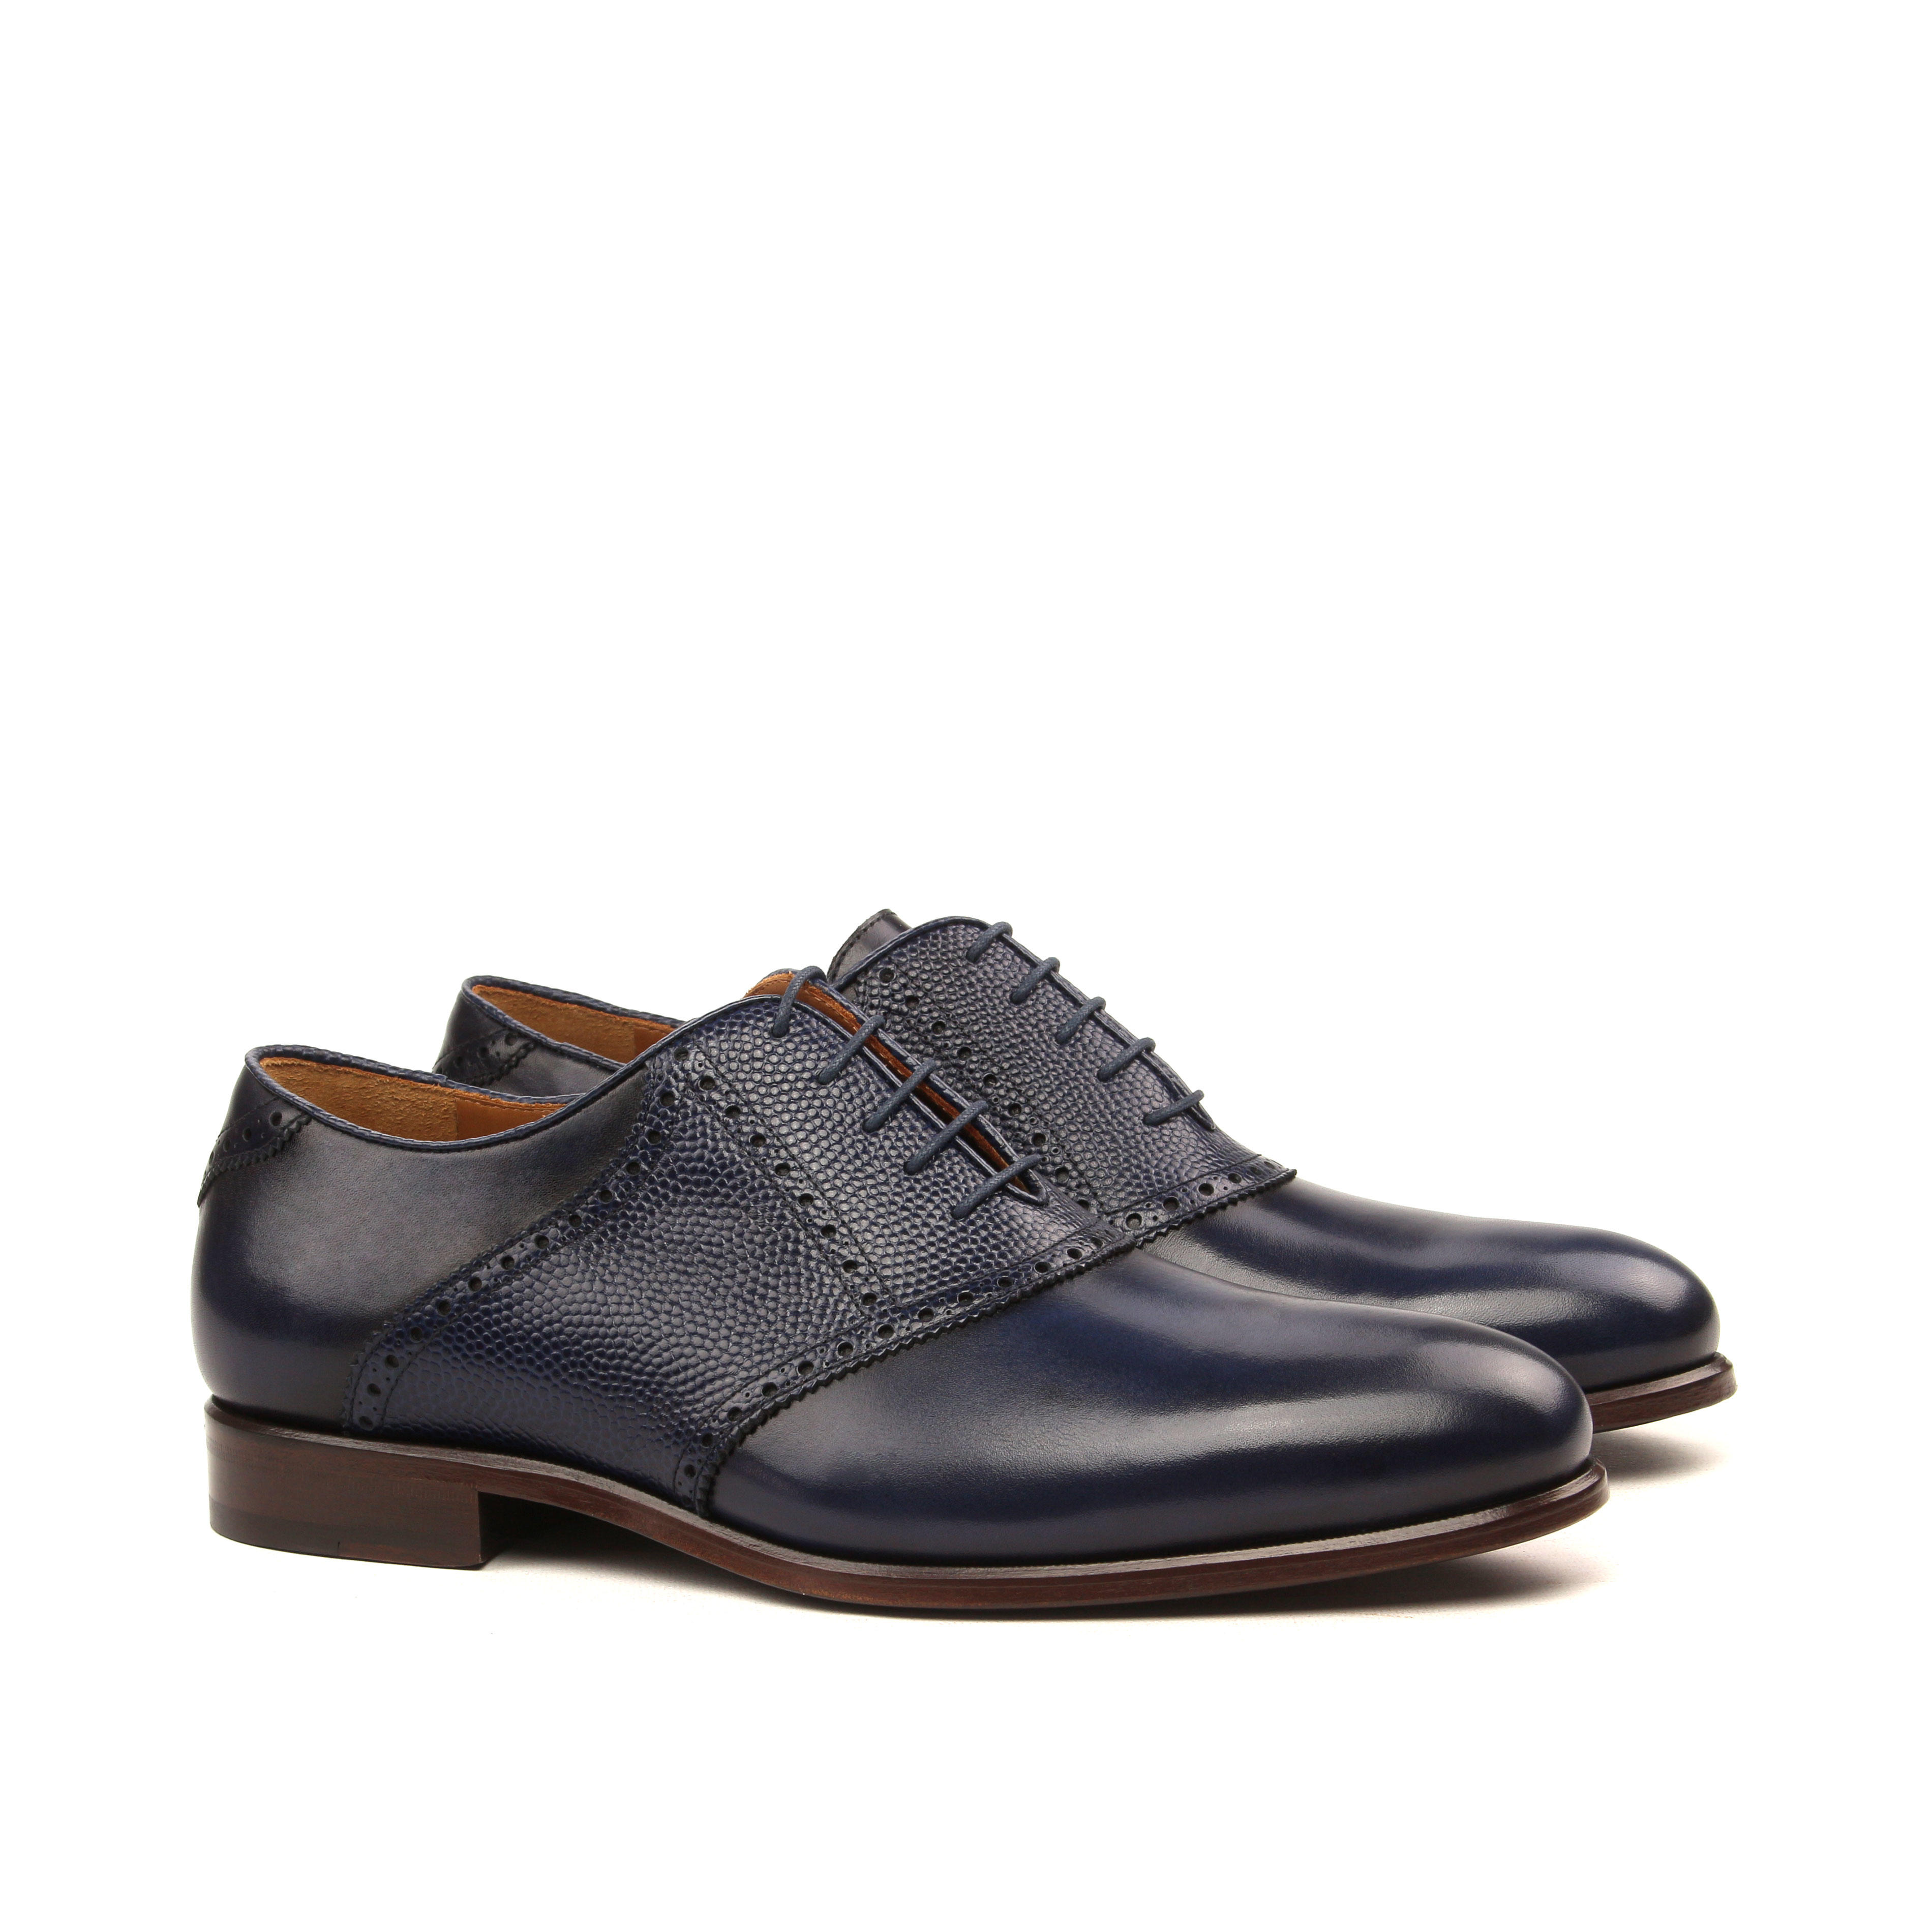 MANOR OF LONDON 'The Saddle' Navy Painted Calfskin & Pebble Grain Shoe Luxury Custom Initials Monogrammed Front Side View